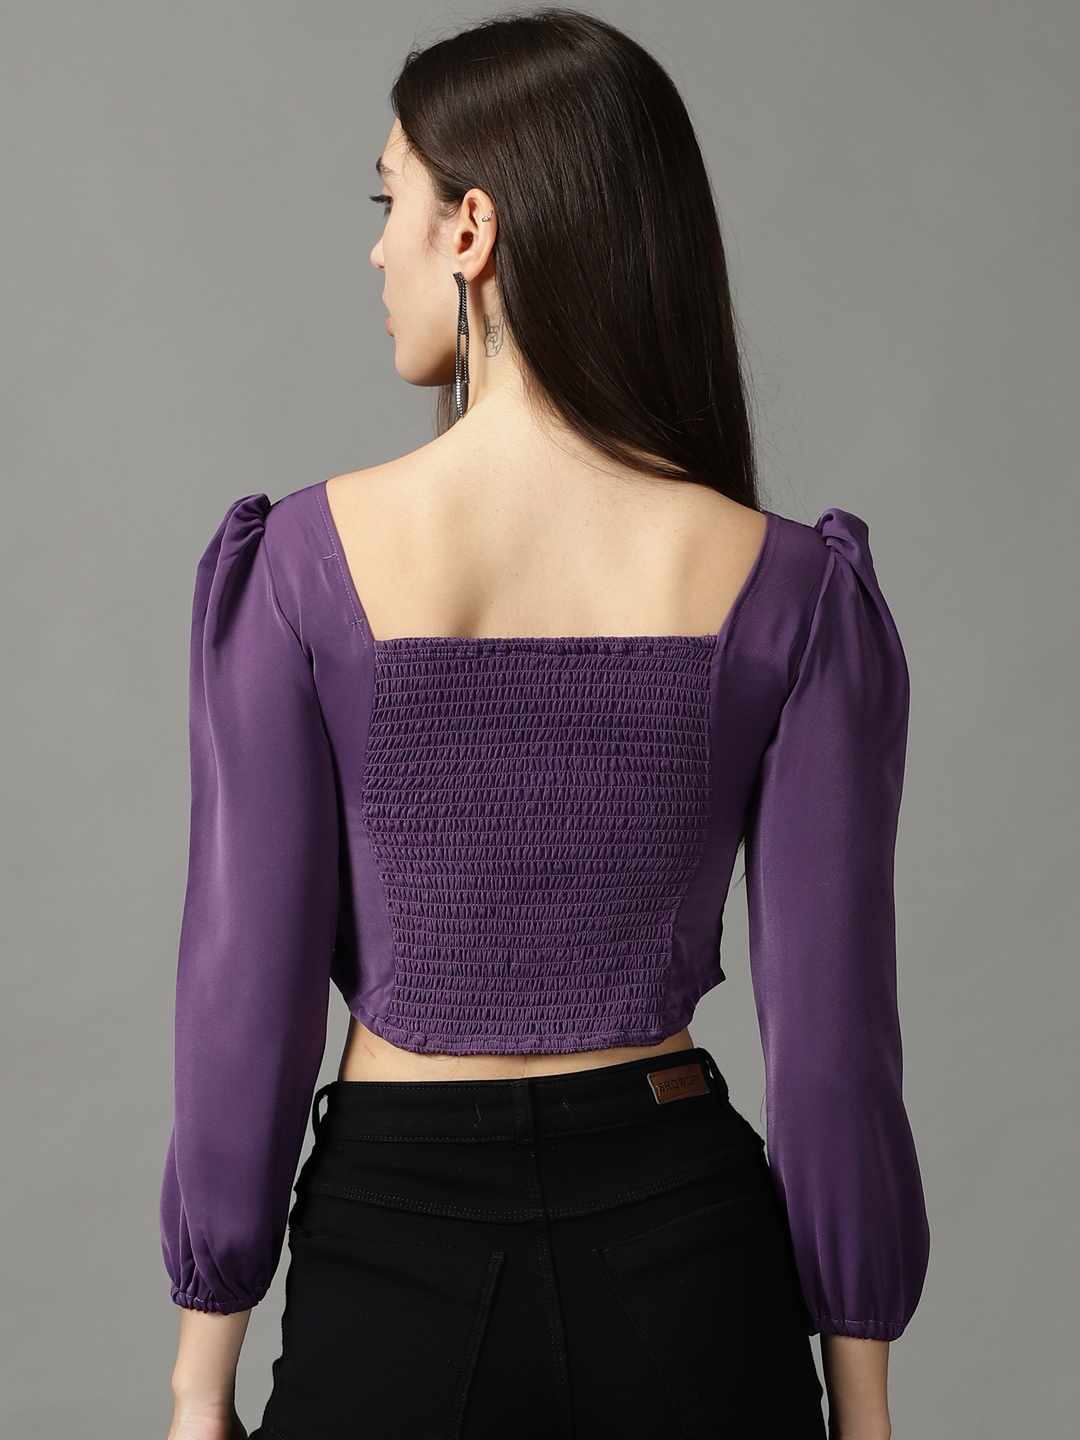 Women's Purple Polyester Solid Tops